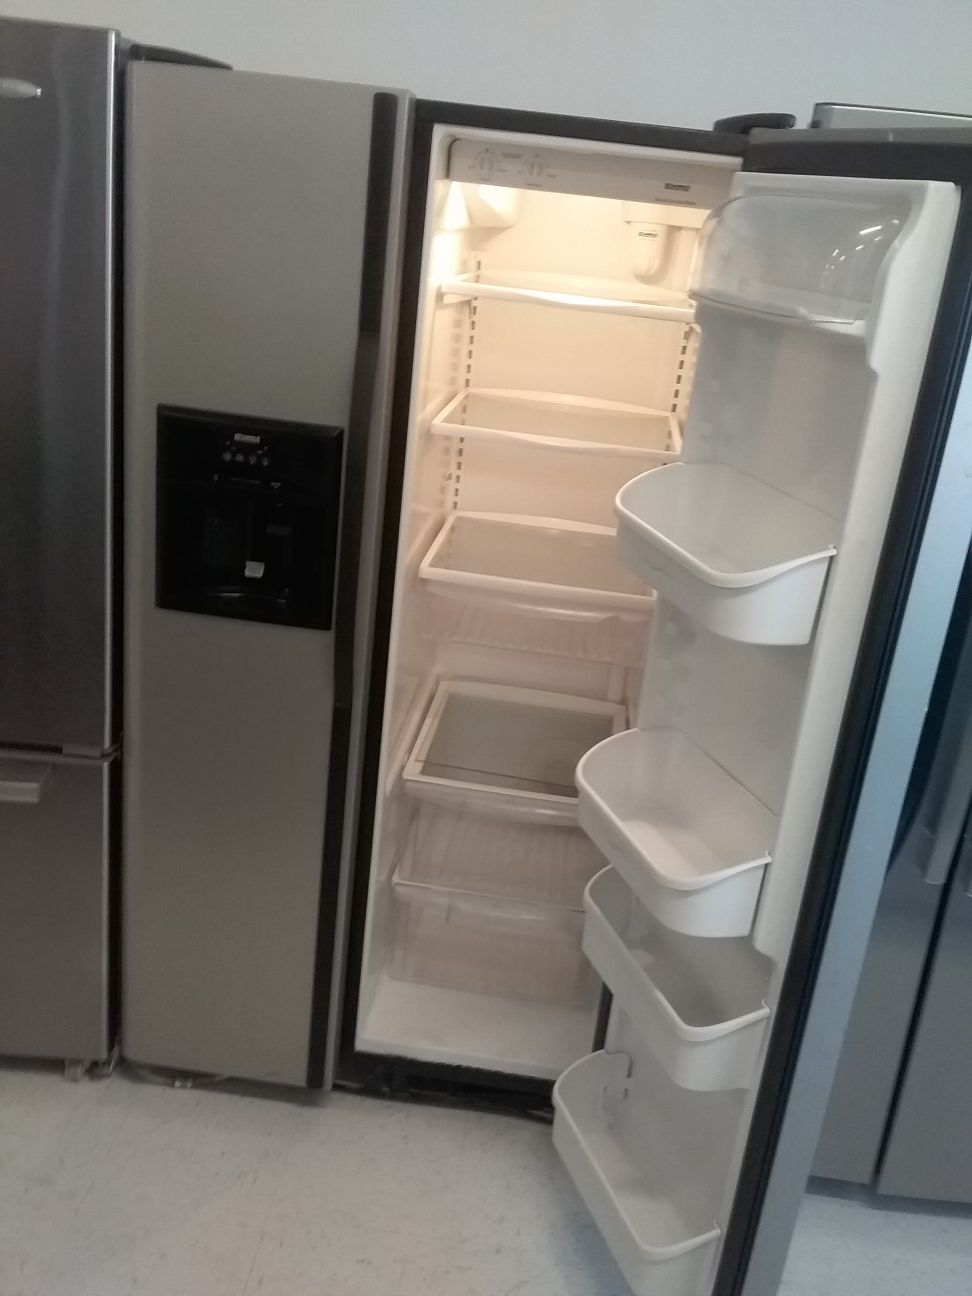 Kenmore side by side stainless steel refrigerator used good condition 90days warranty 🔥🔥🔥